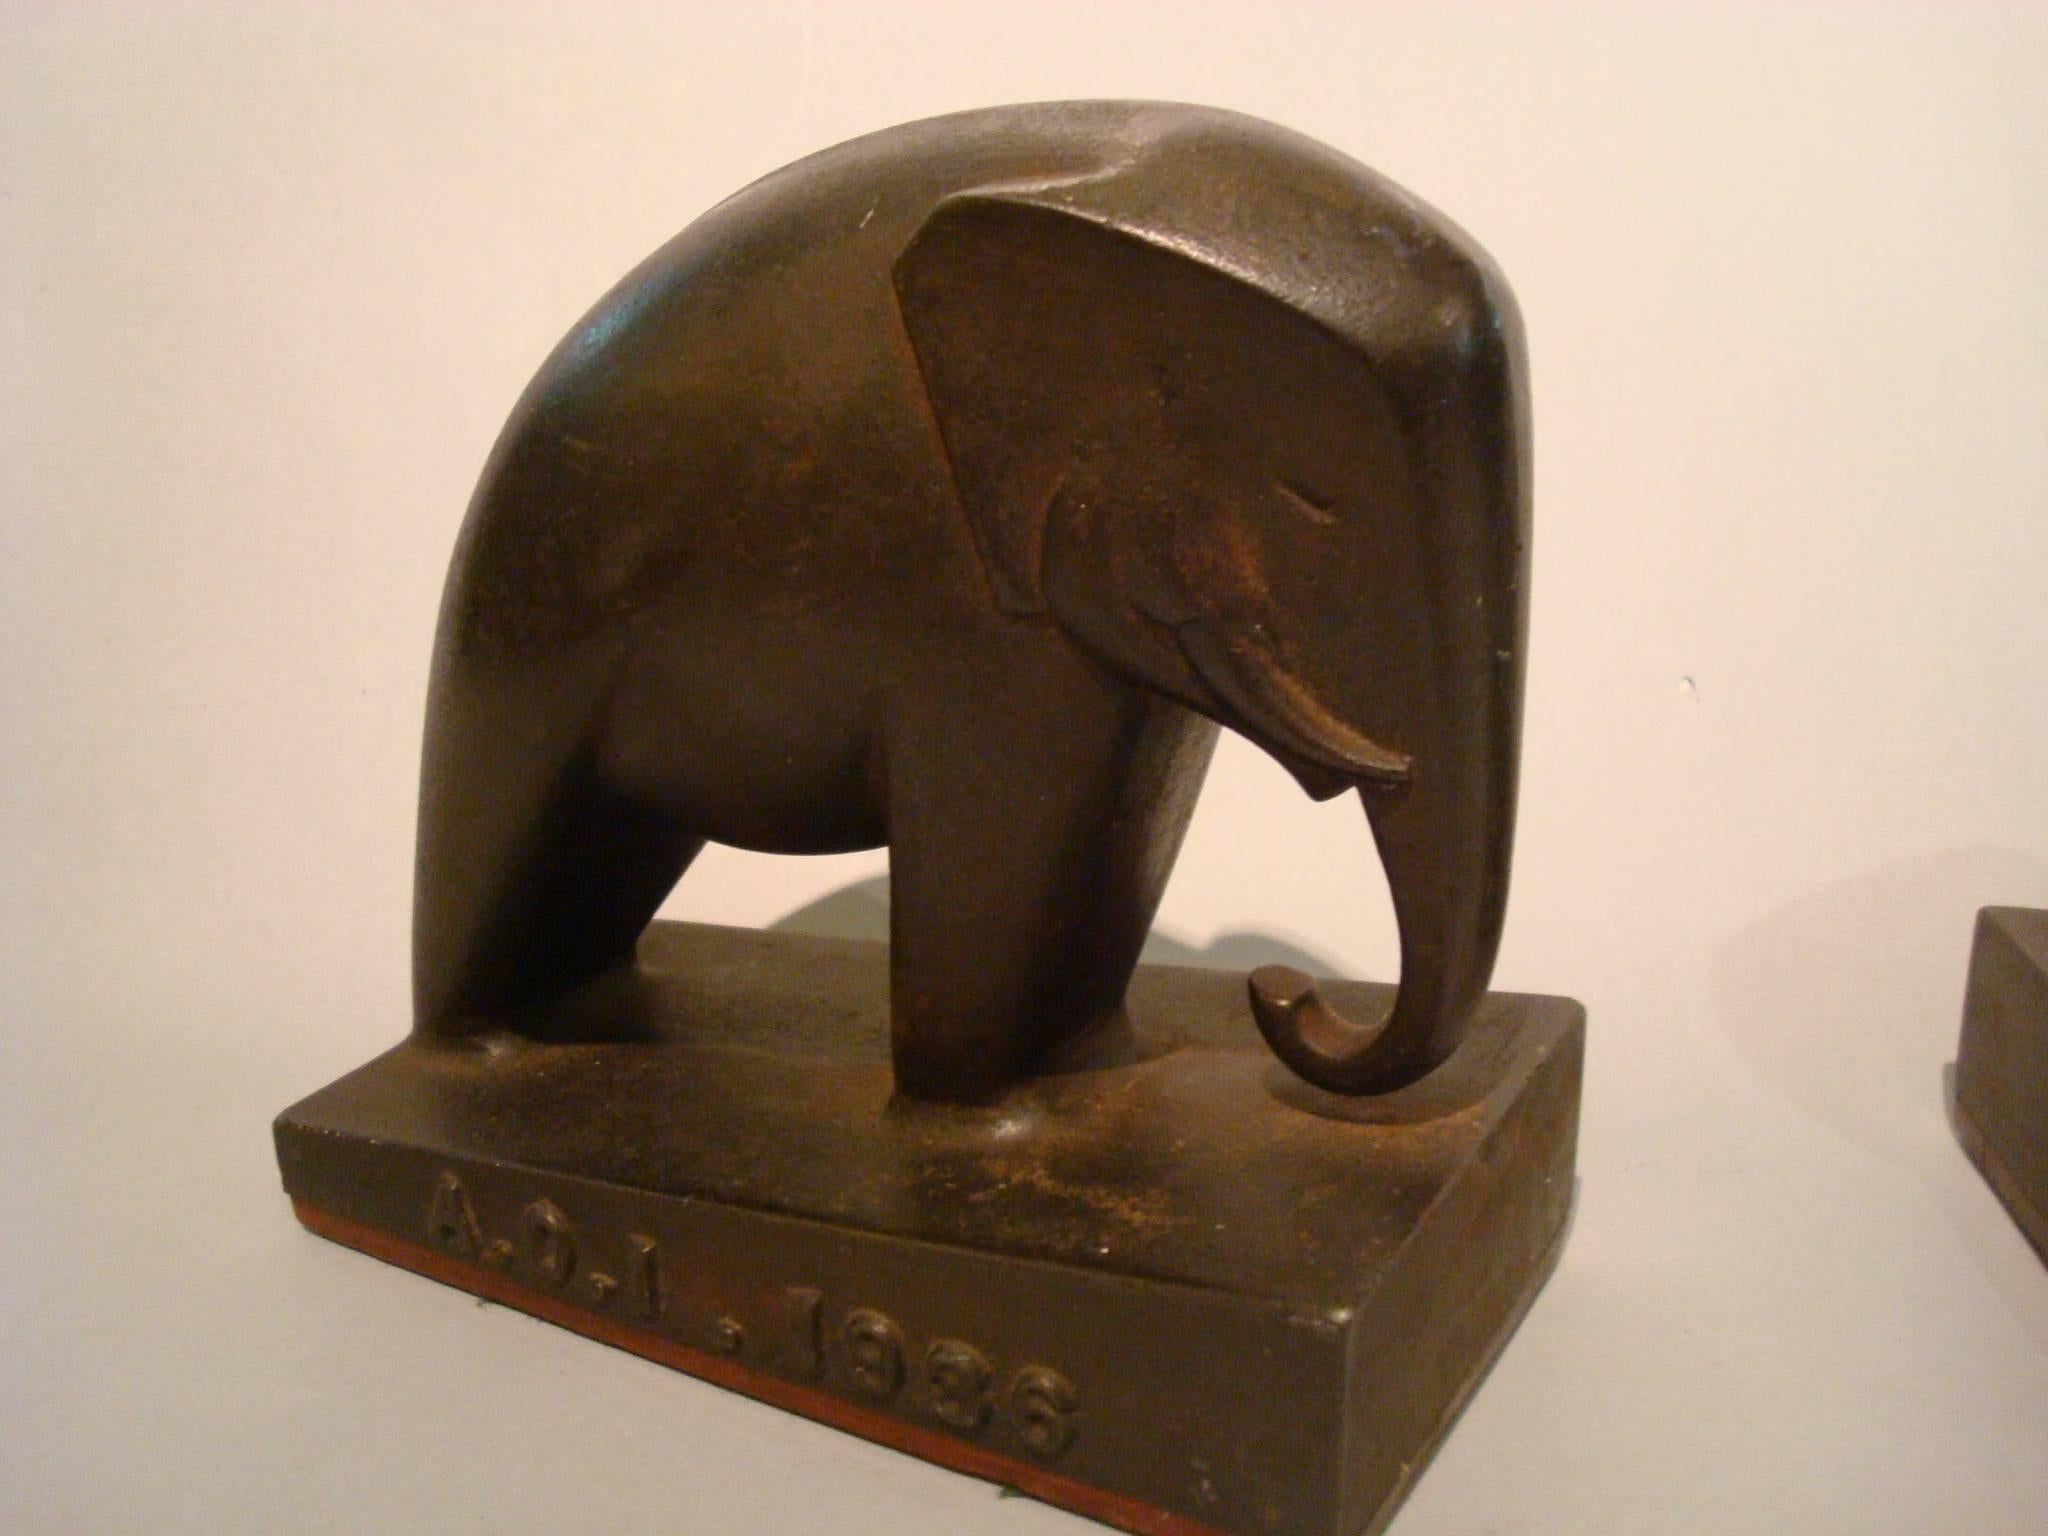 20th century Art Deco iron elephant bookends, Italy, 1936. Very nice and heavy Bookends. Marked A. O. I. 1936 - means Africa Orientale Italiana. 

Italian East Africa (Italian: Africa Orientale Italiana) was an Italian colony in the Horn of